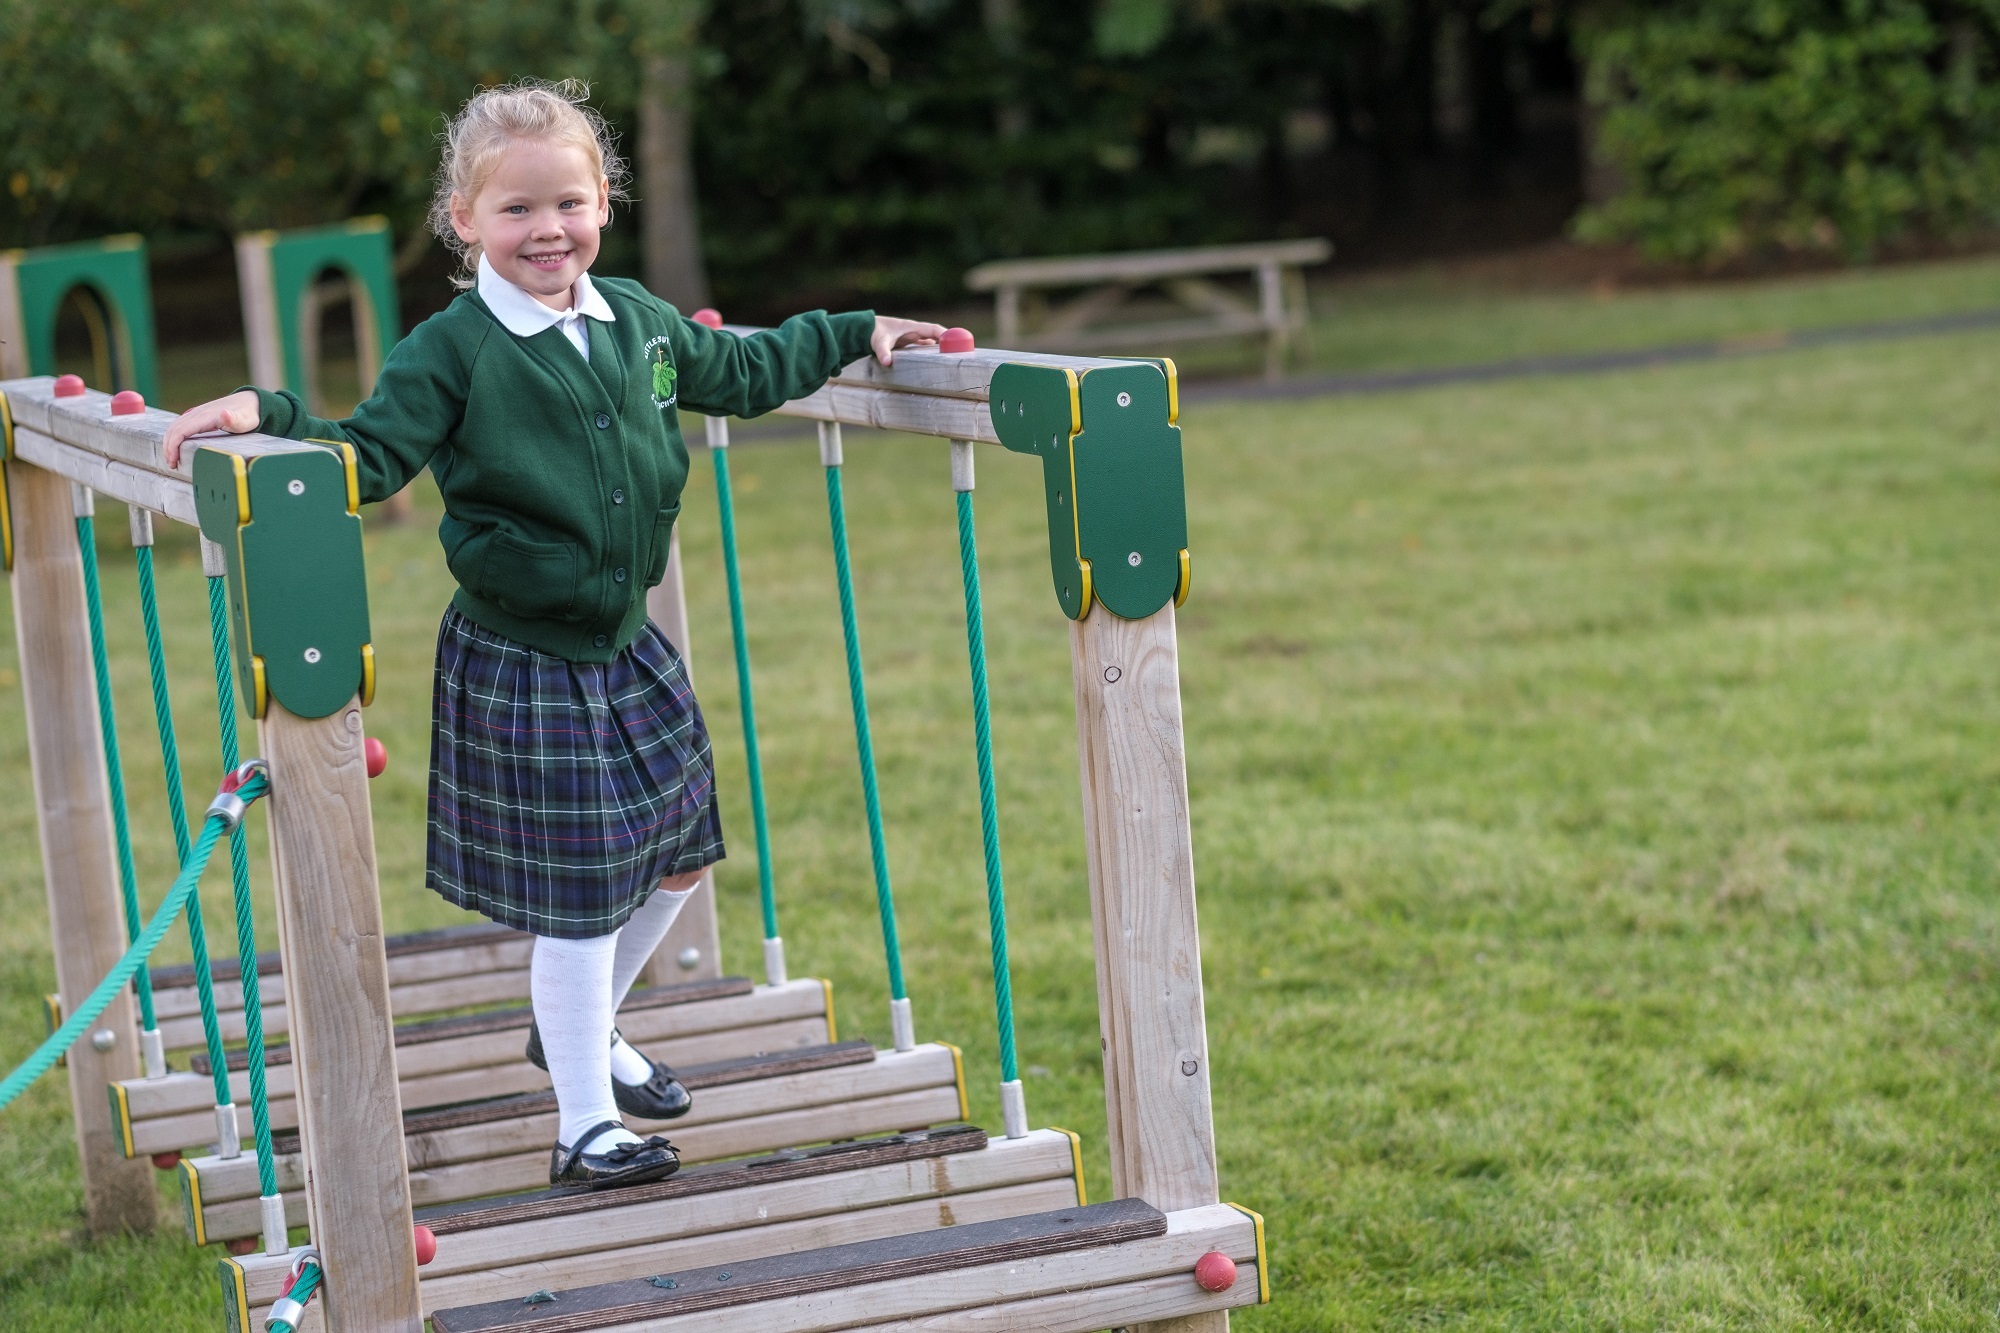 A pupil at Little Sutton C of E Primary School shows off the new school uniform on the trim trail.